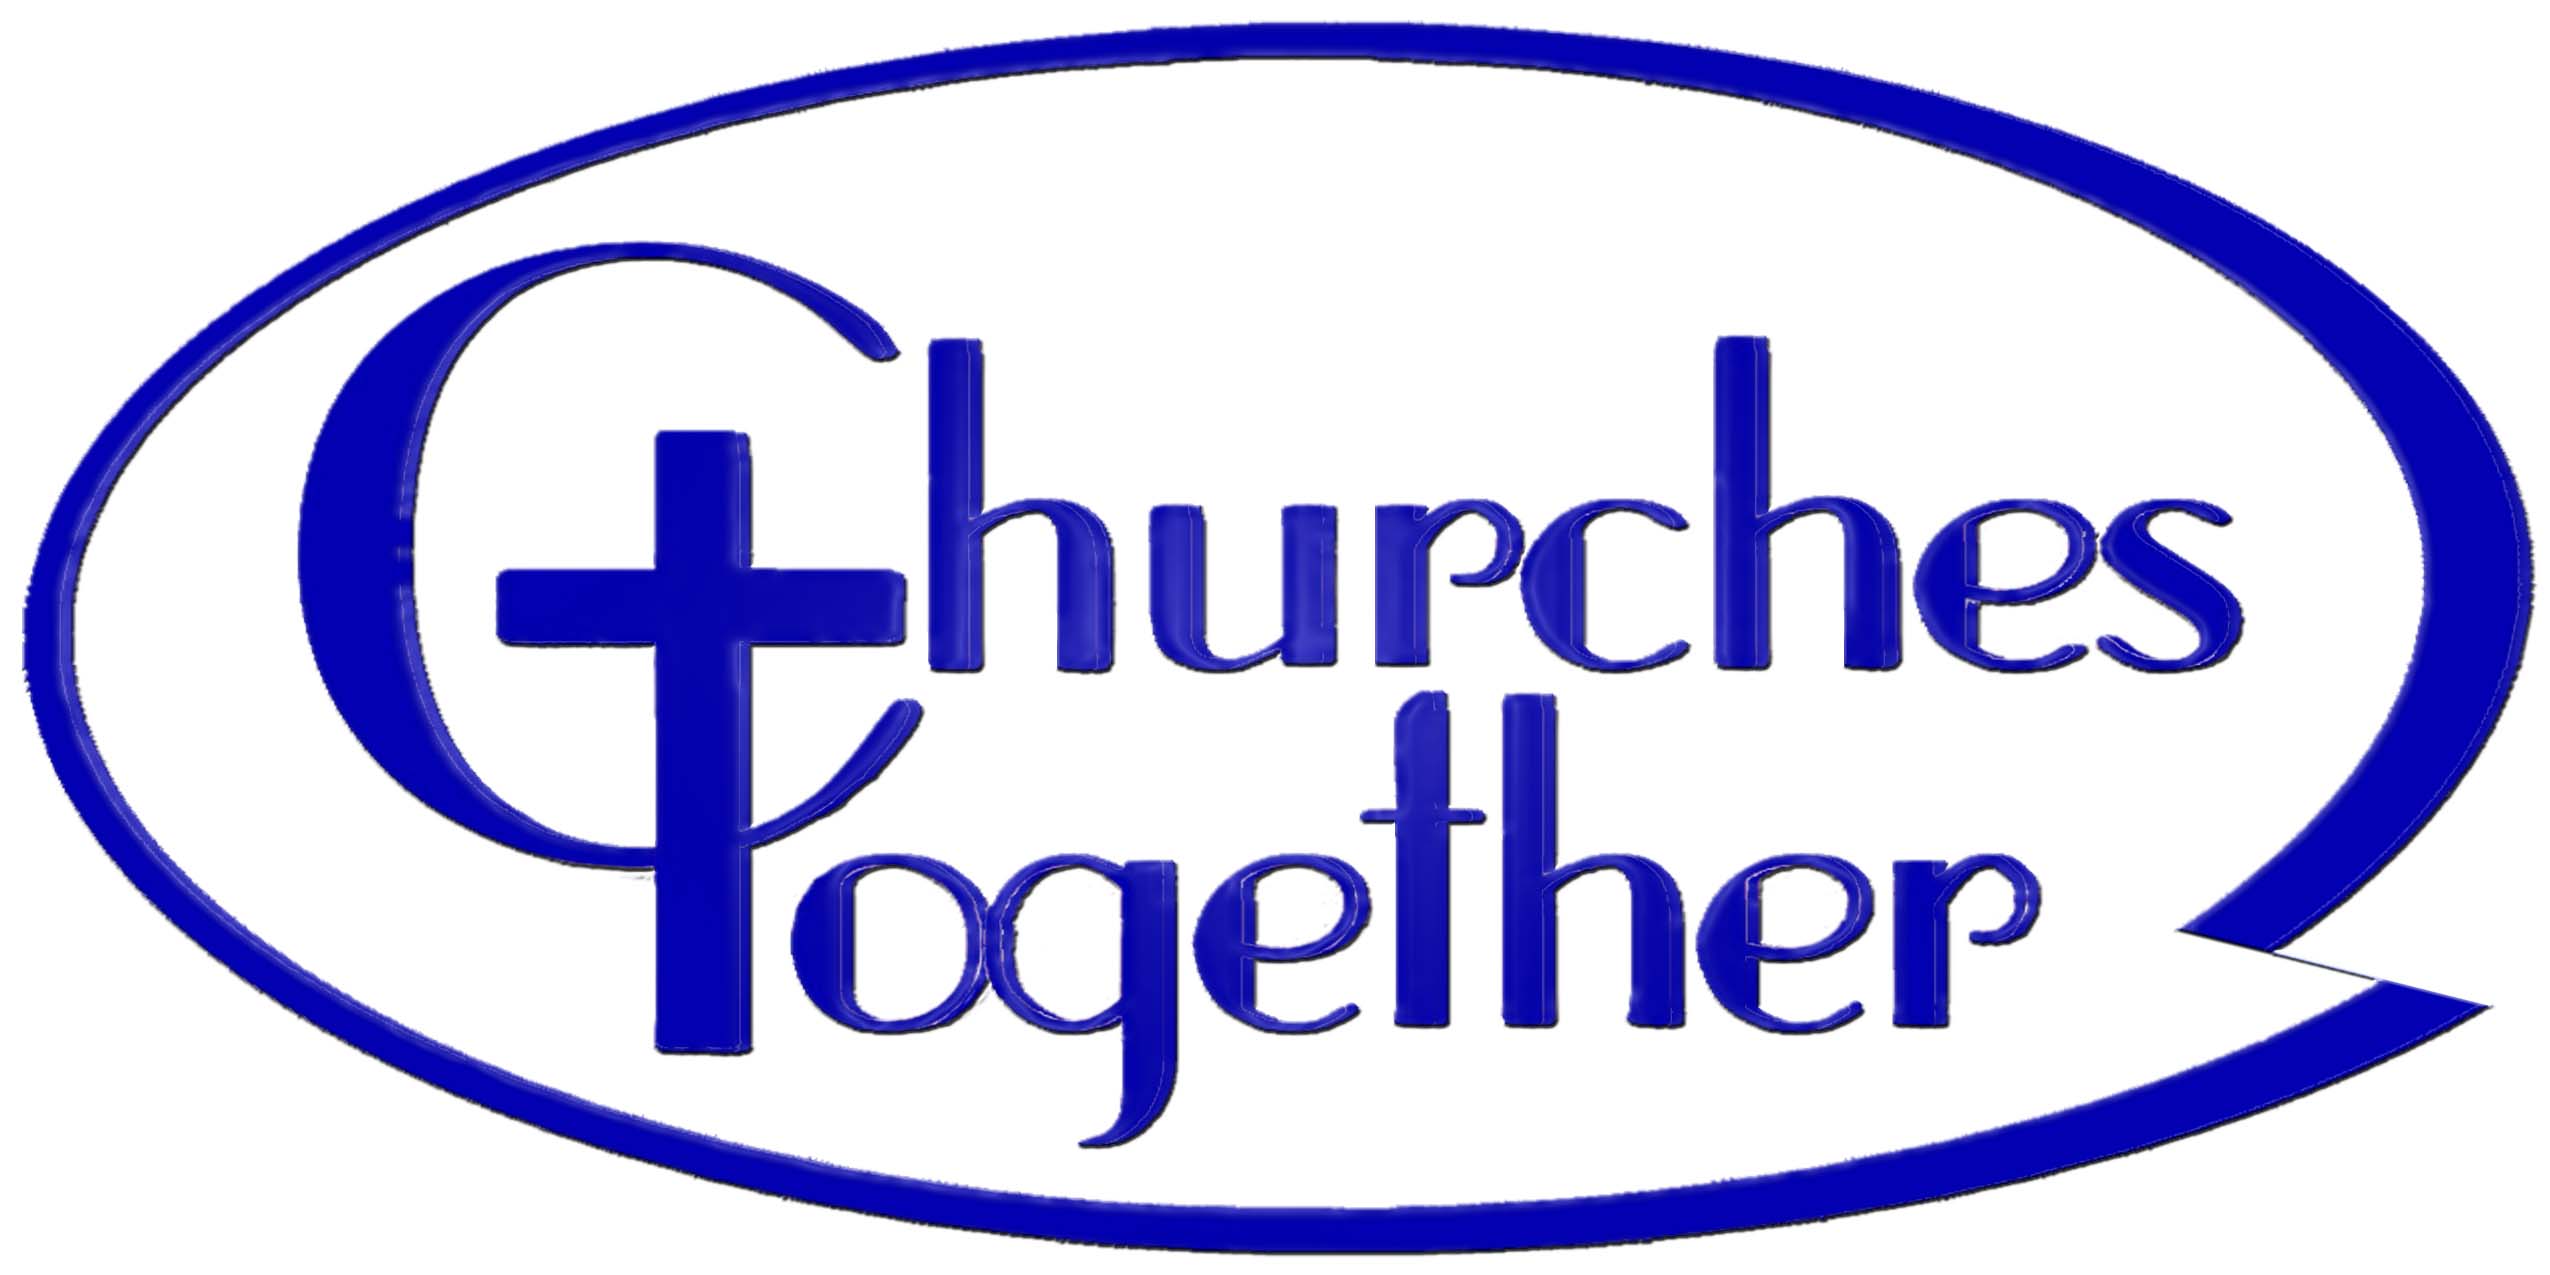 Resources | English-speaking Churches Together in Brussels